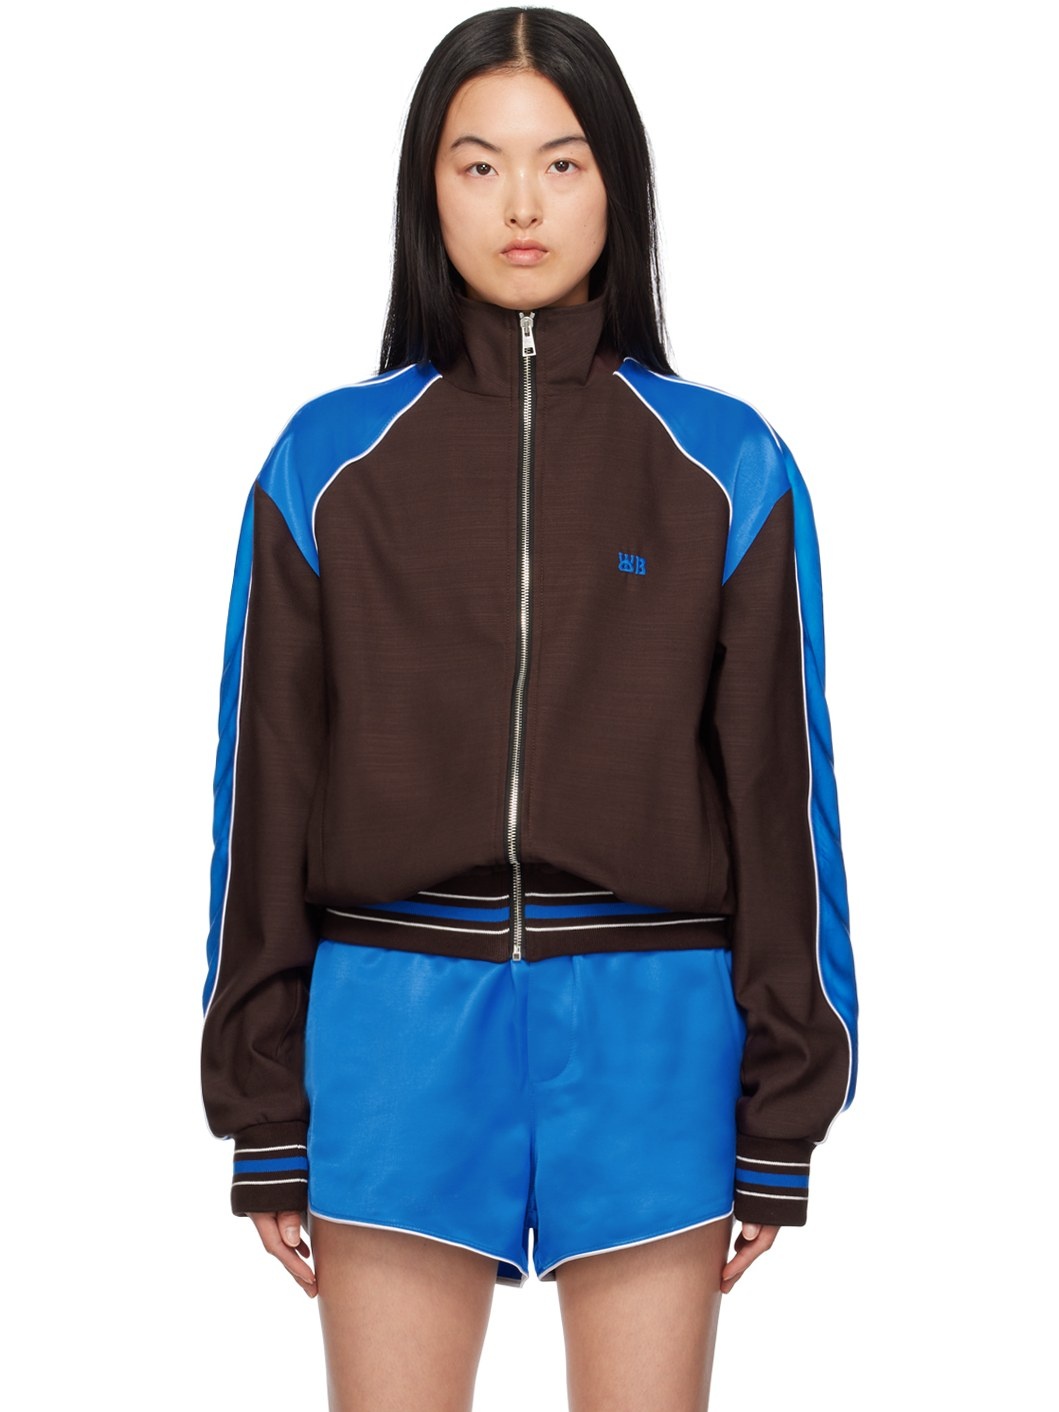 Brown & Blue Courage Track Jacket - 1